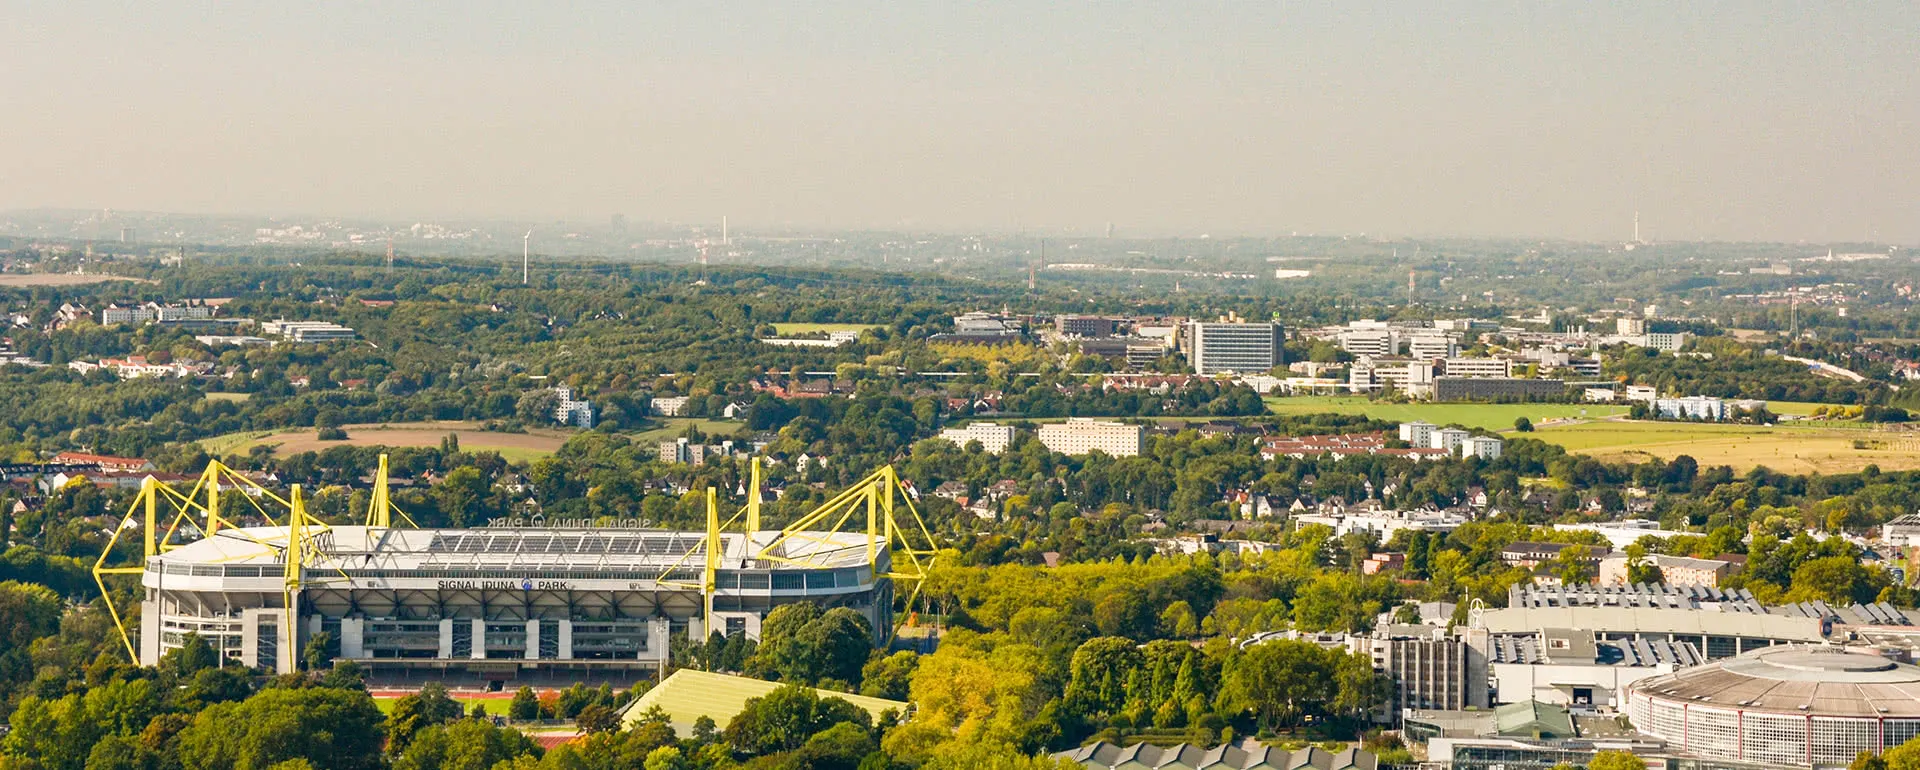 Dortmund - the destination with youth hostels